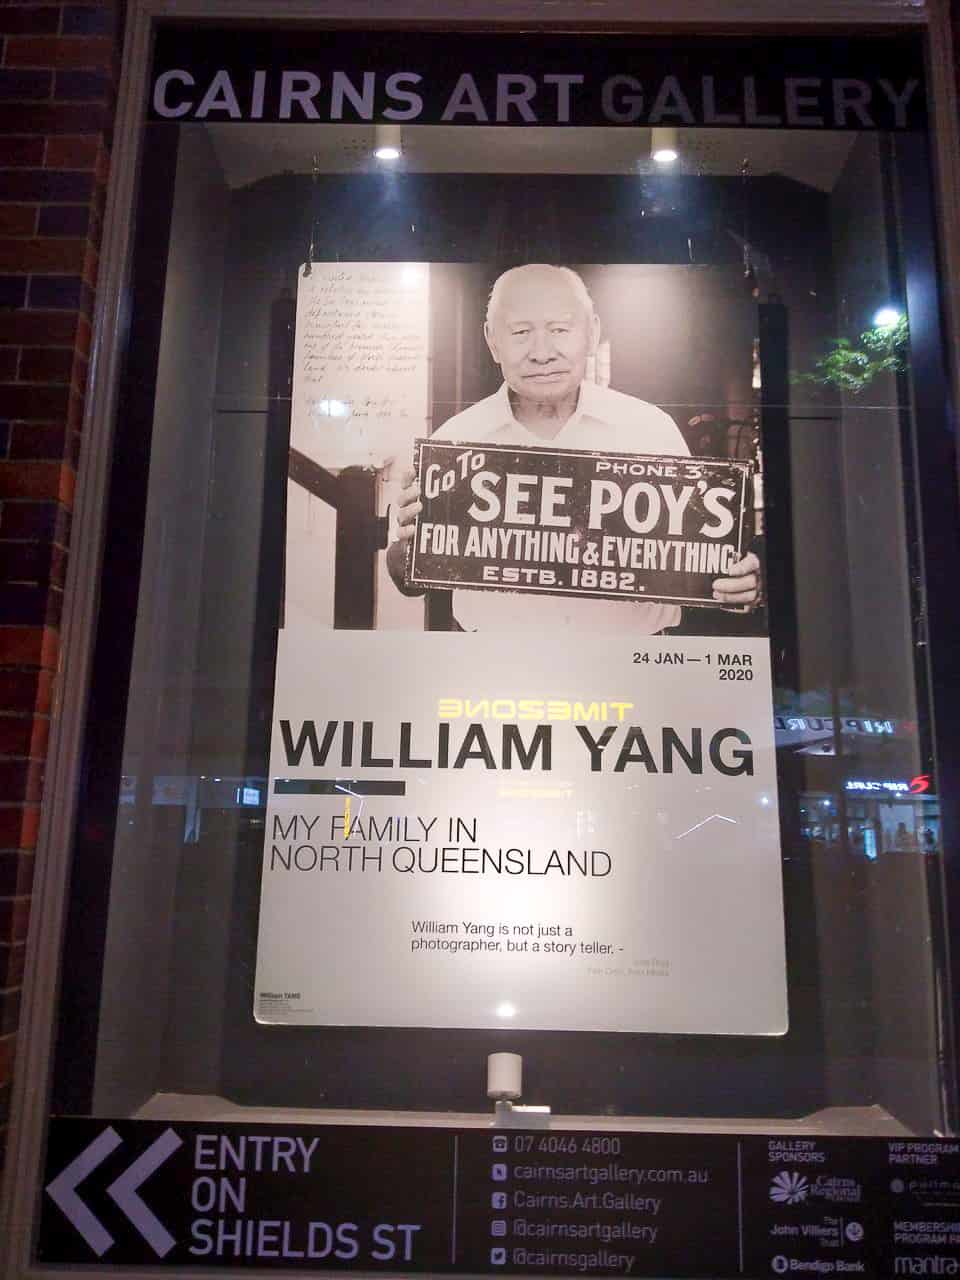 William Yang photo exhibition at the Cairns Art Gallery in North Queensland, Australia // travelmermaid.com